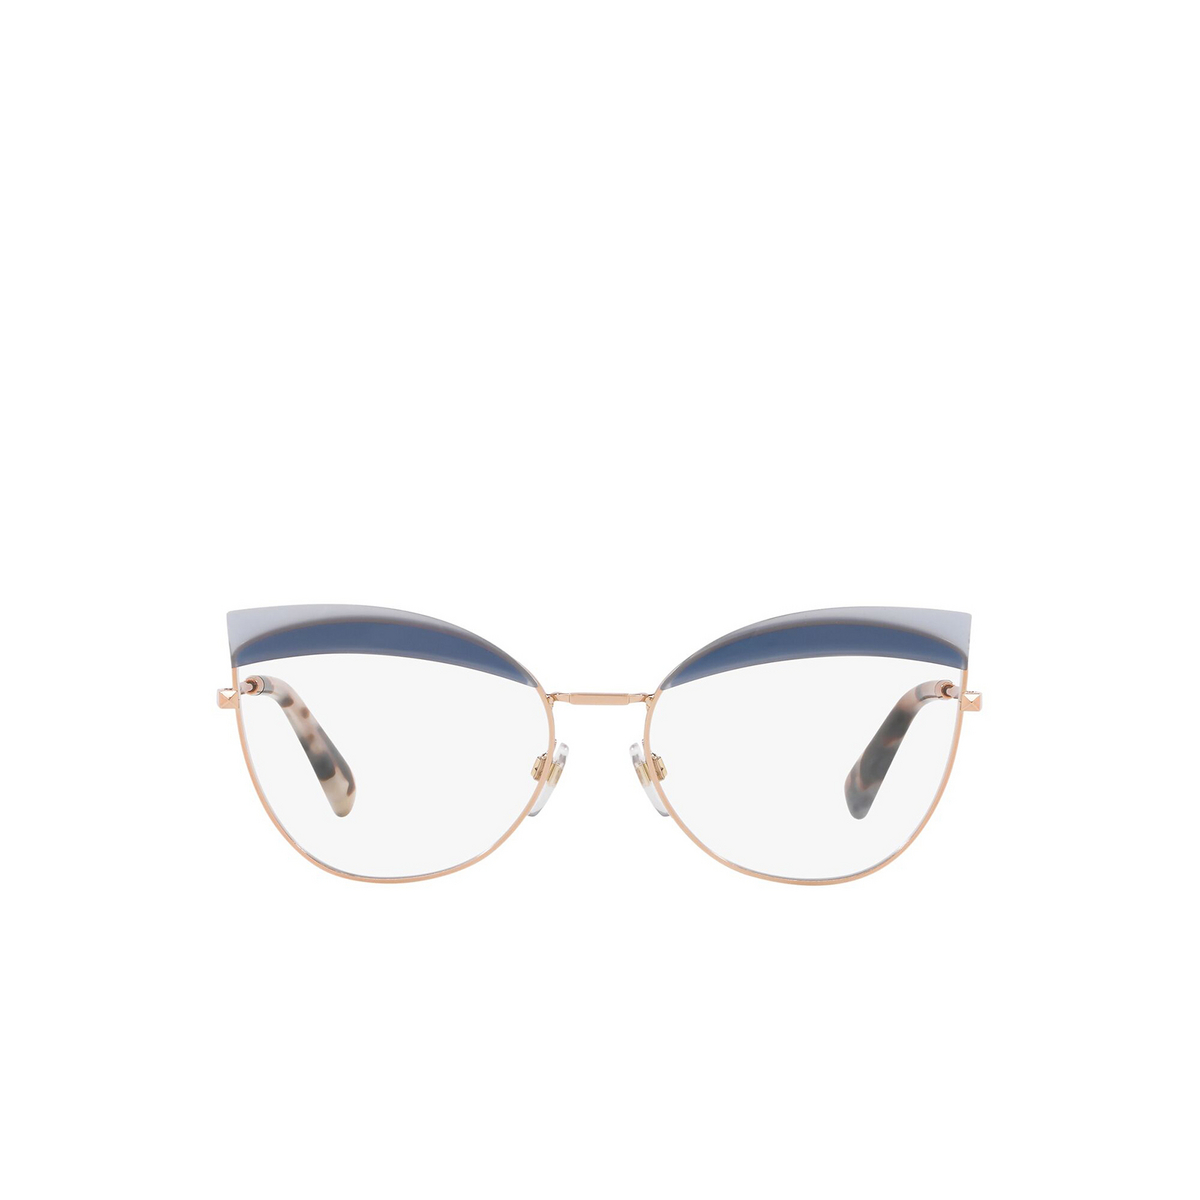 Valentino® Butterfly Eyeglasses: VA1014 color Rose Gold 3004 - front view.